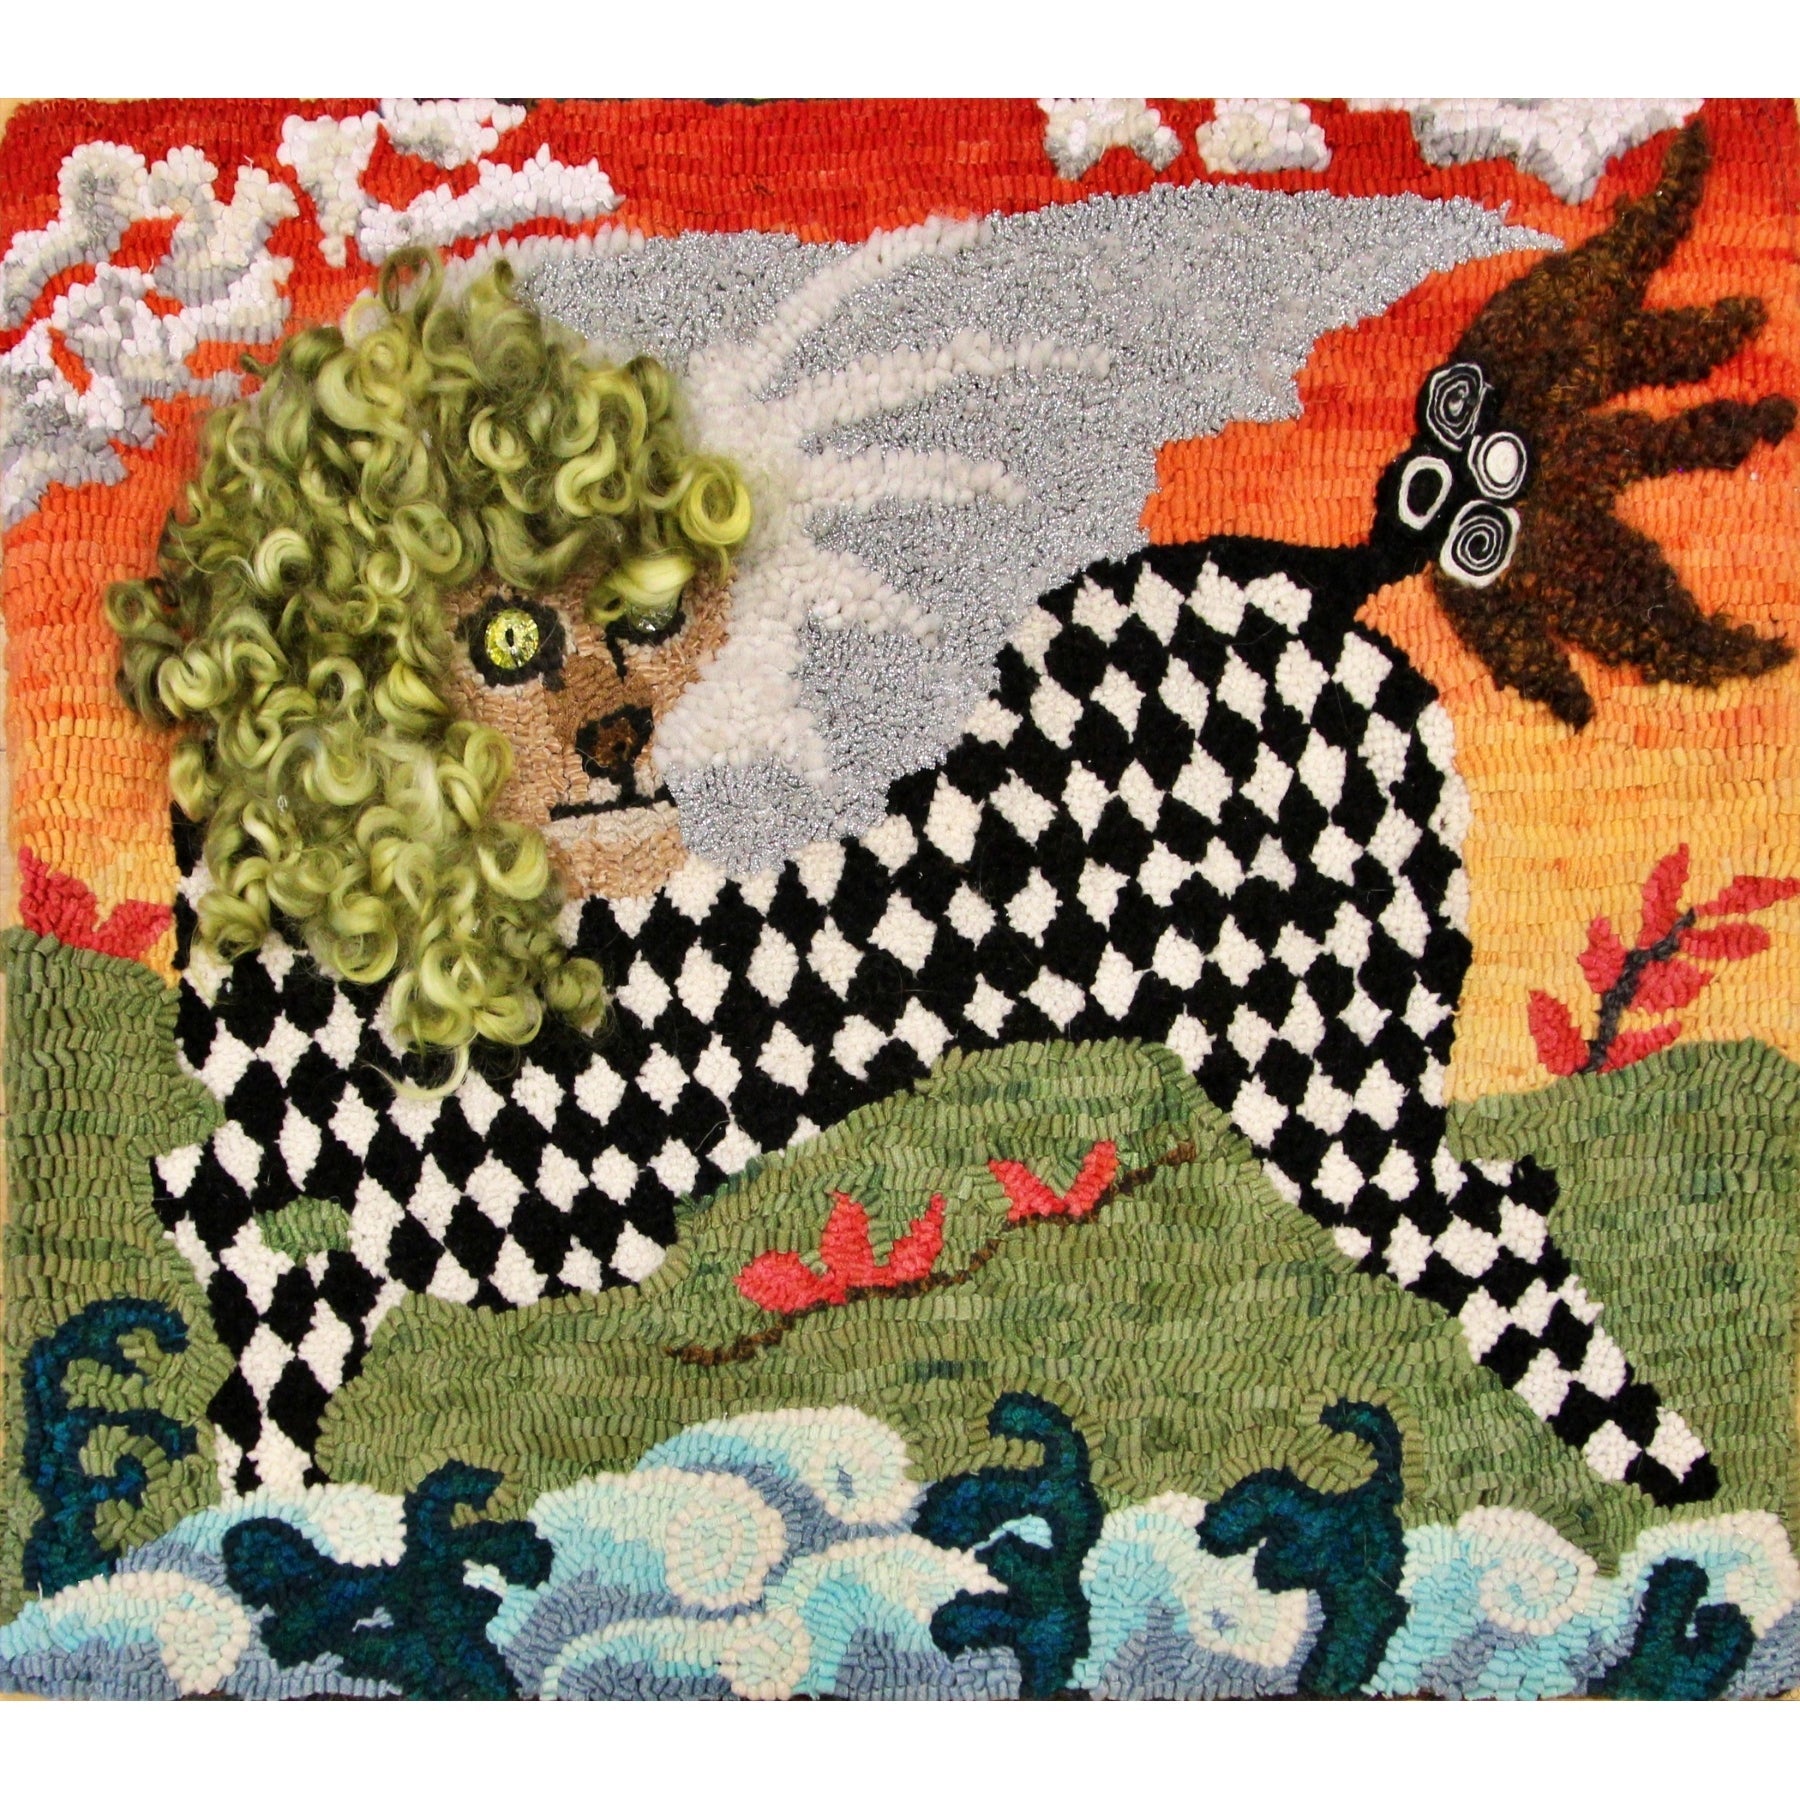 Winged Lion, rug hooked by Susan Barry